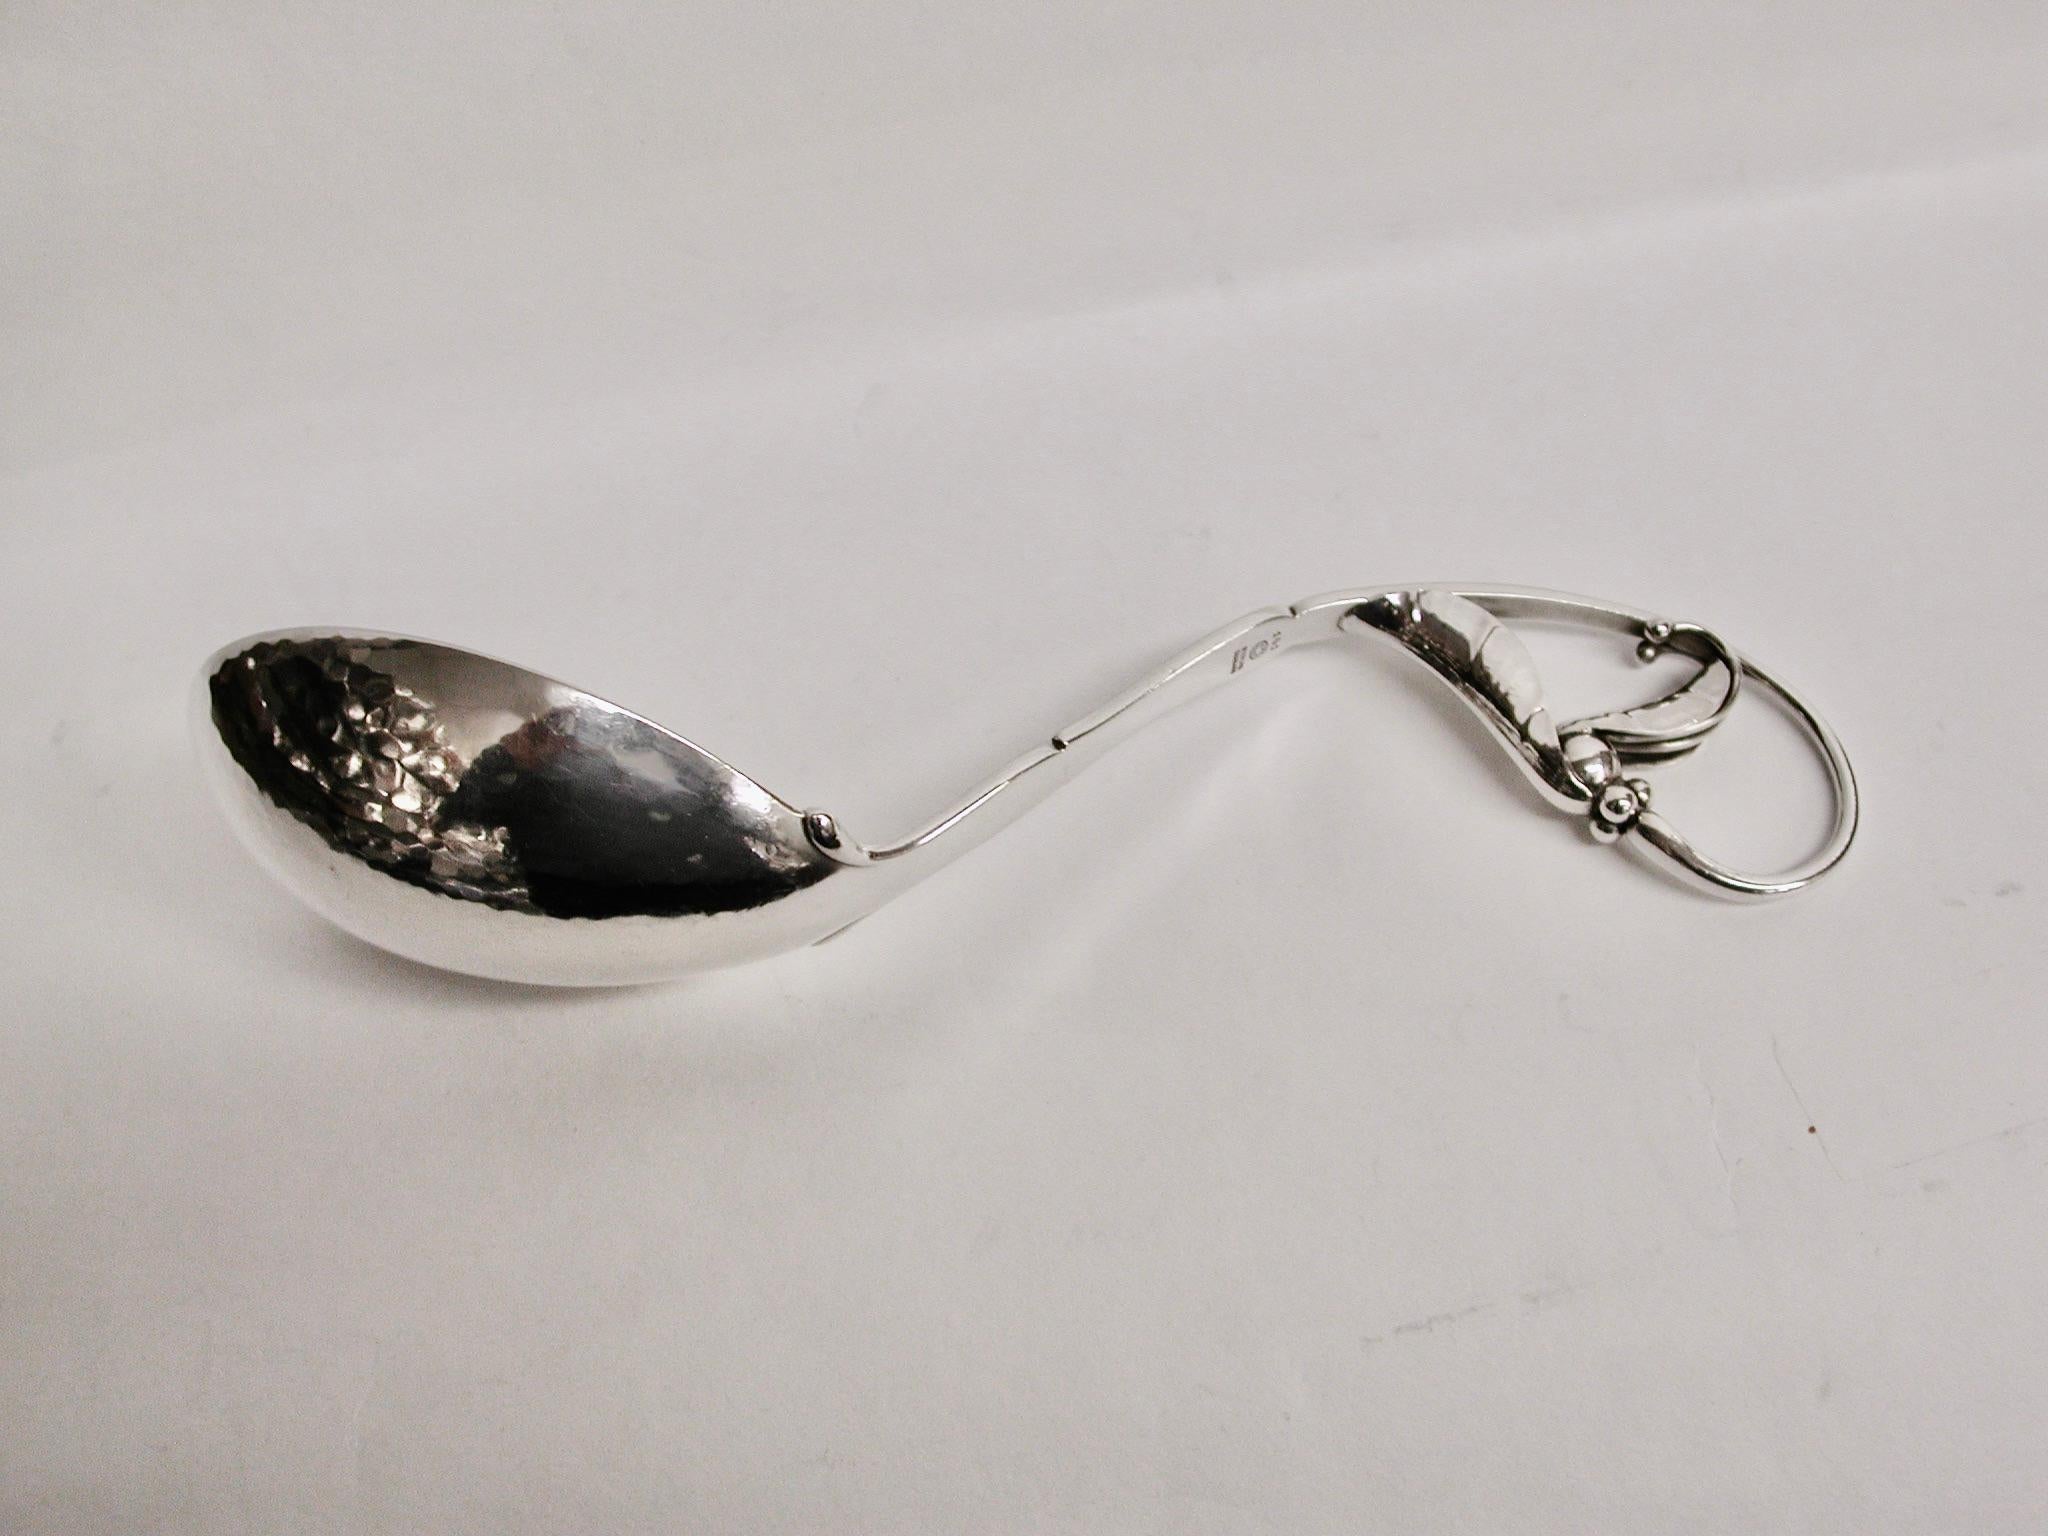 Ornamental Georg Jensen Sterling Silver Serving Spoon, circa 1950 In Good Condition For Sale In London, GB